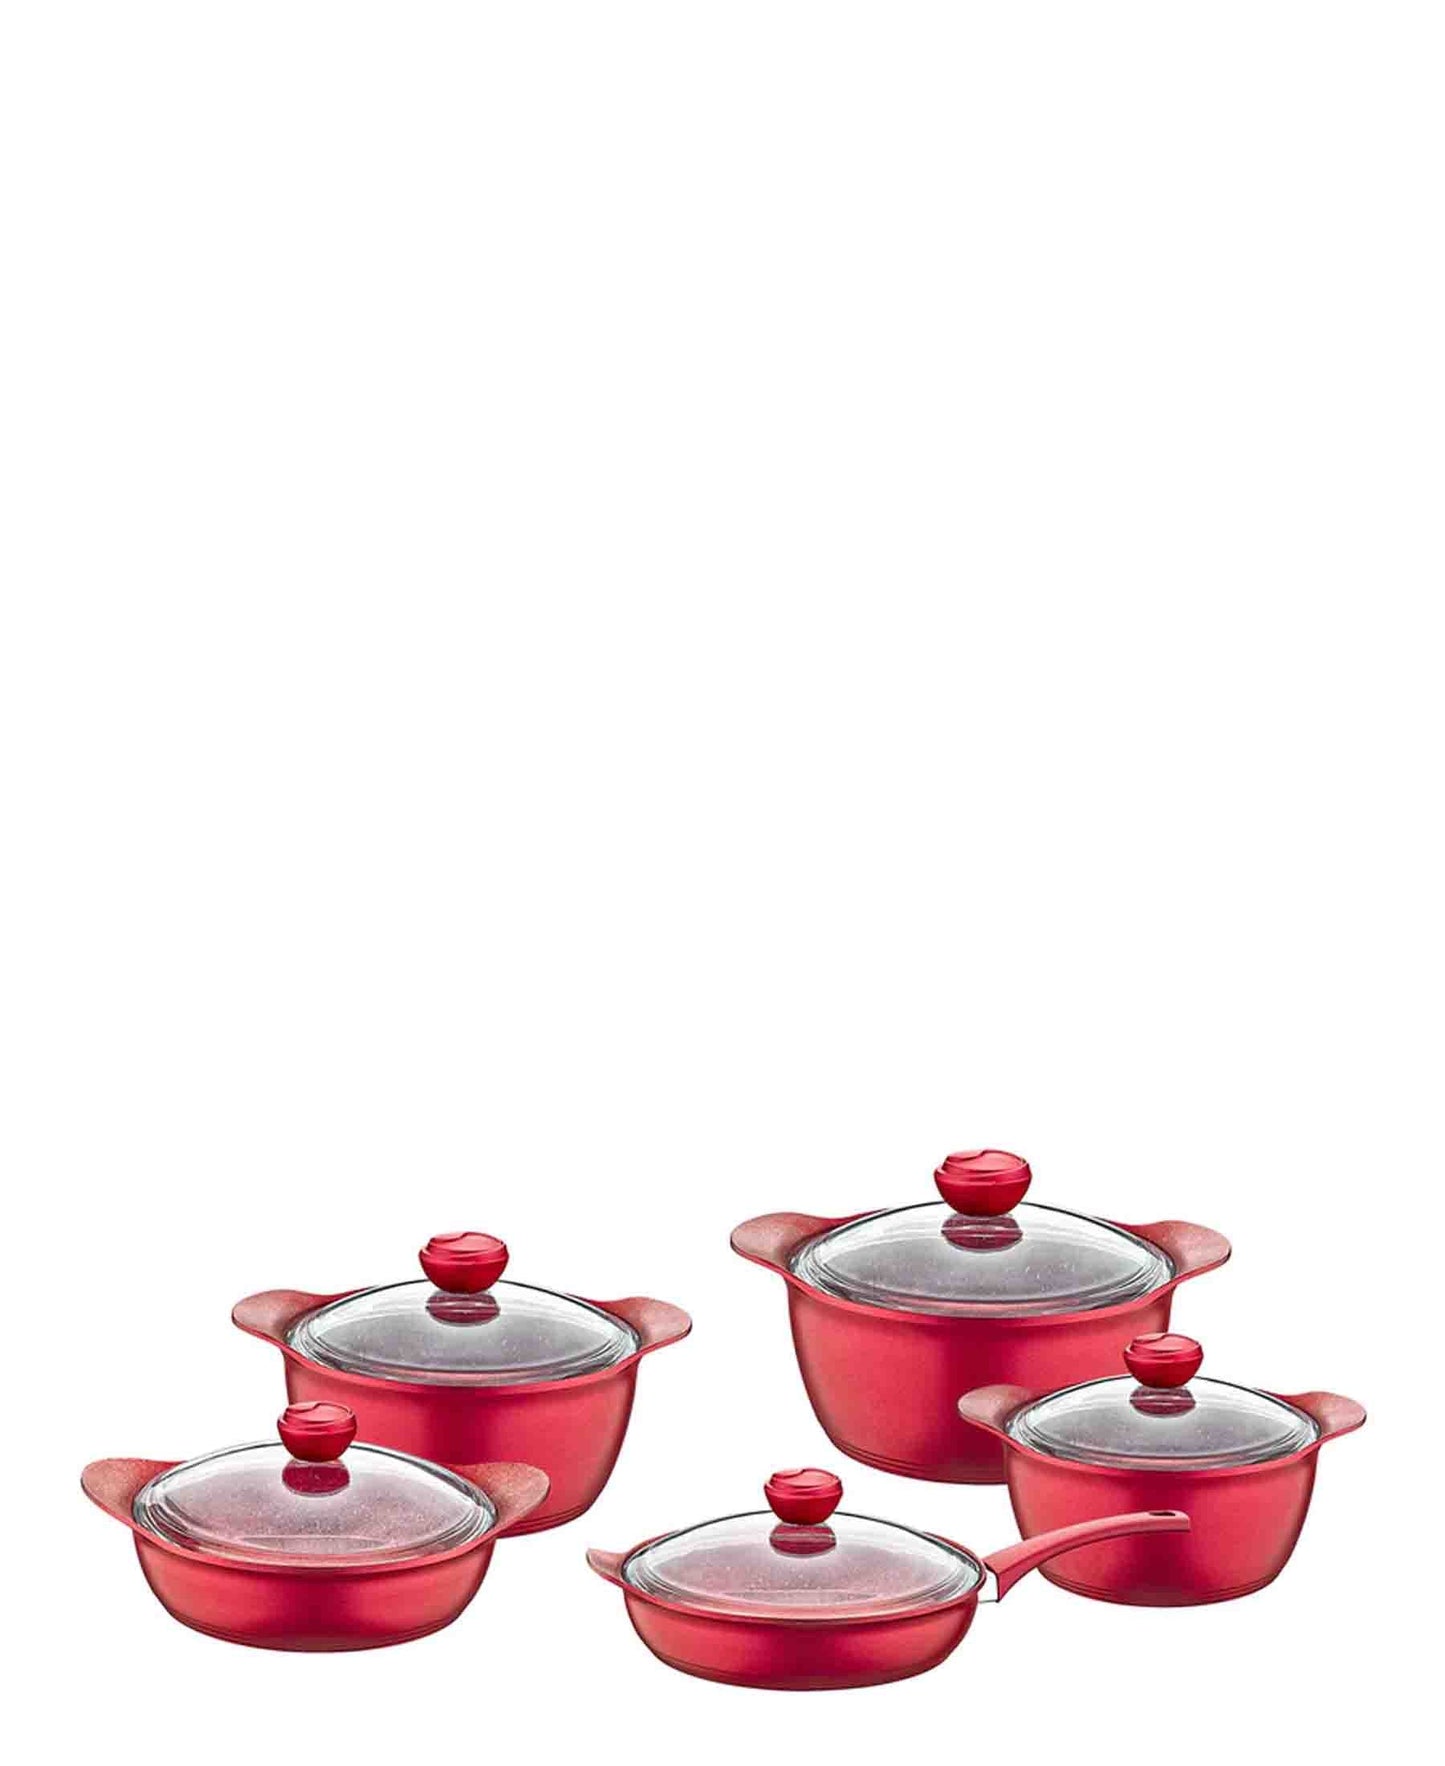 OMS Granite Cookware Set 10 Piece - Red